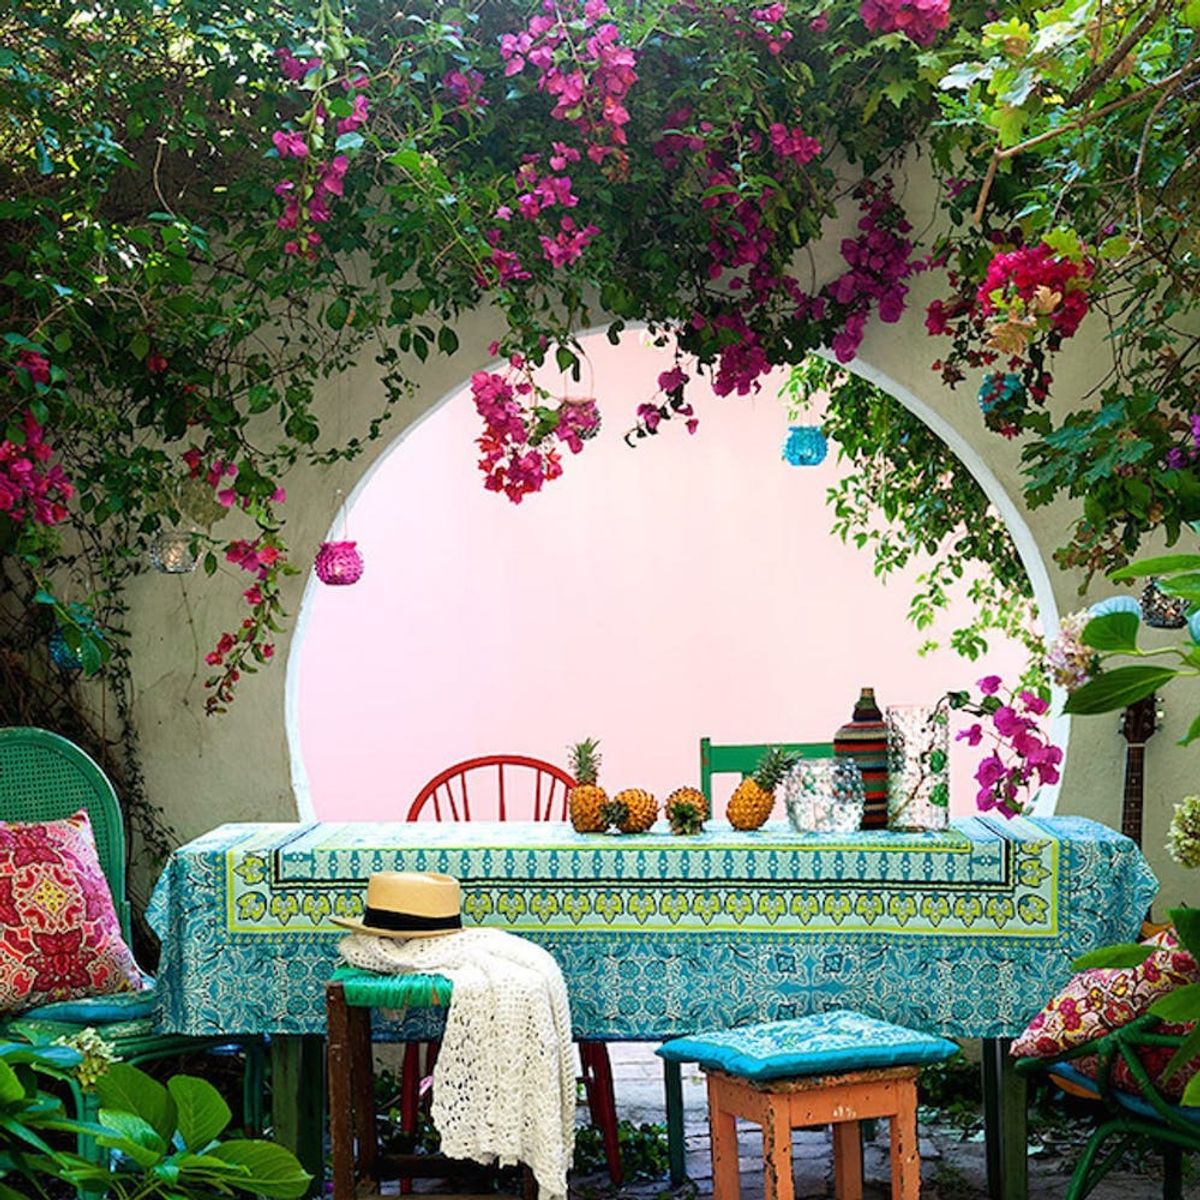 14 Ways to Make Your Patio Pop With Color